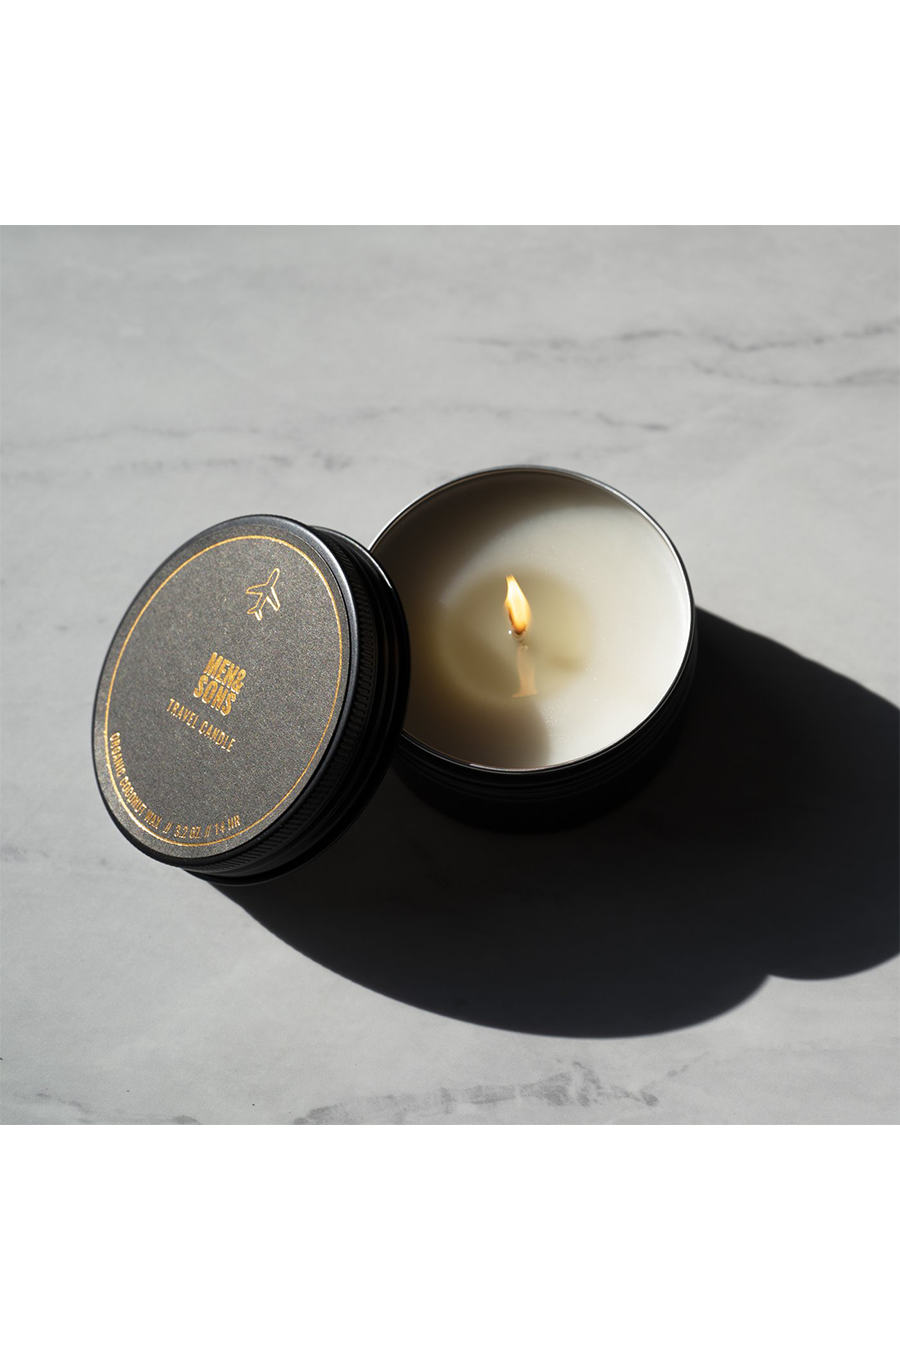 Travel Candle 3oz | Citrus + Vetiver - Main Image Number 1 of 1